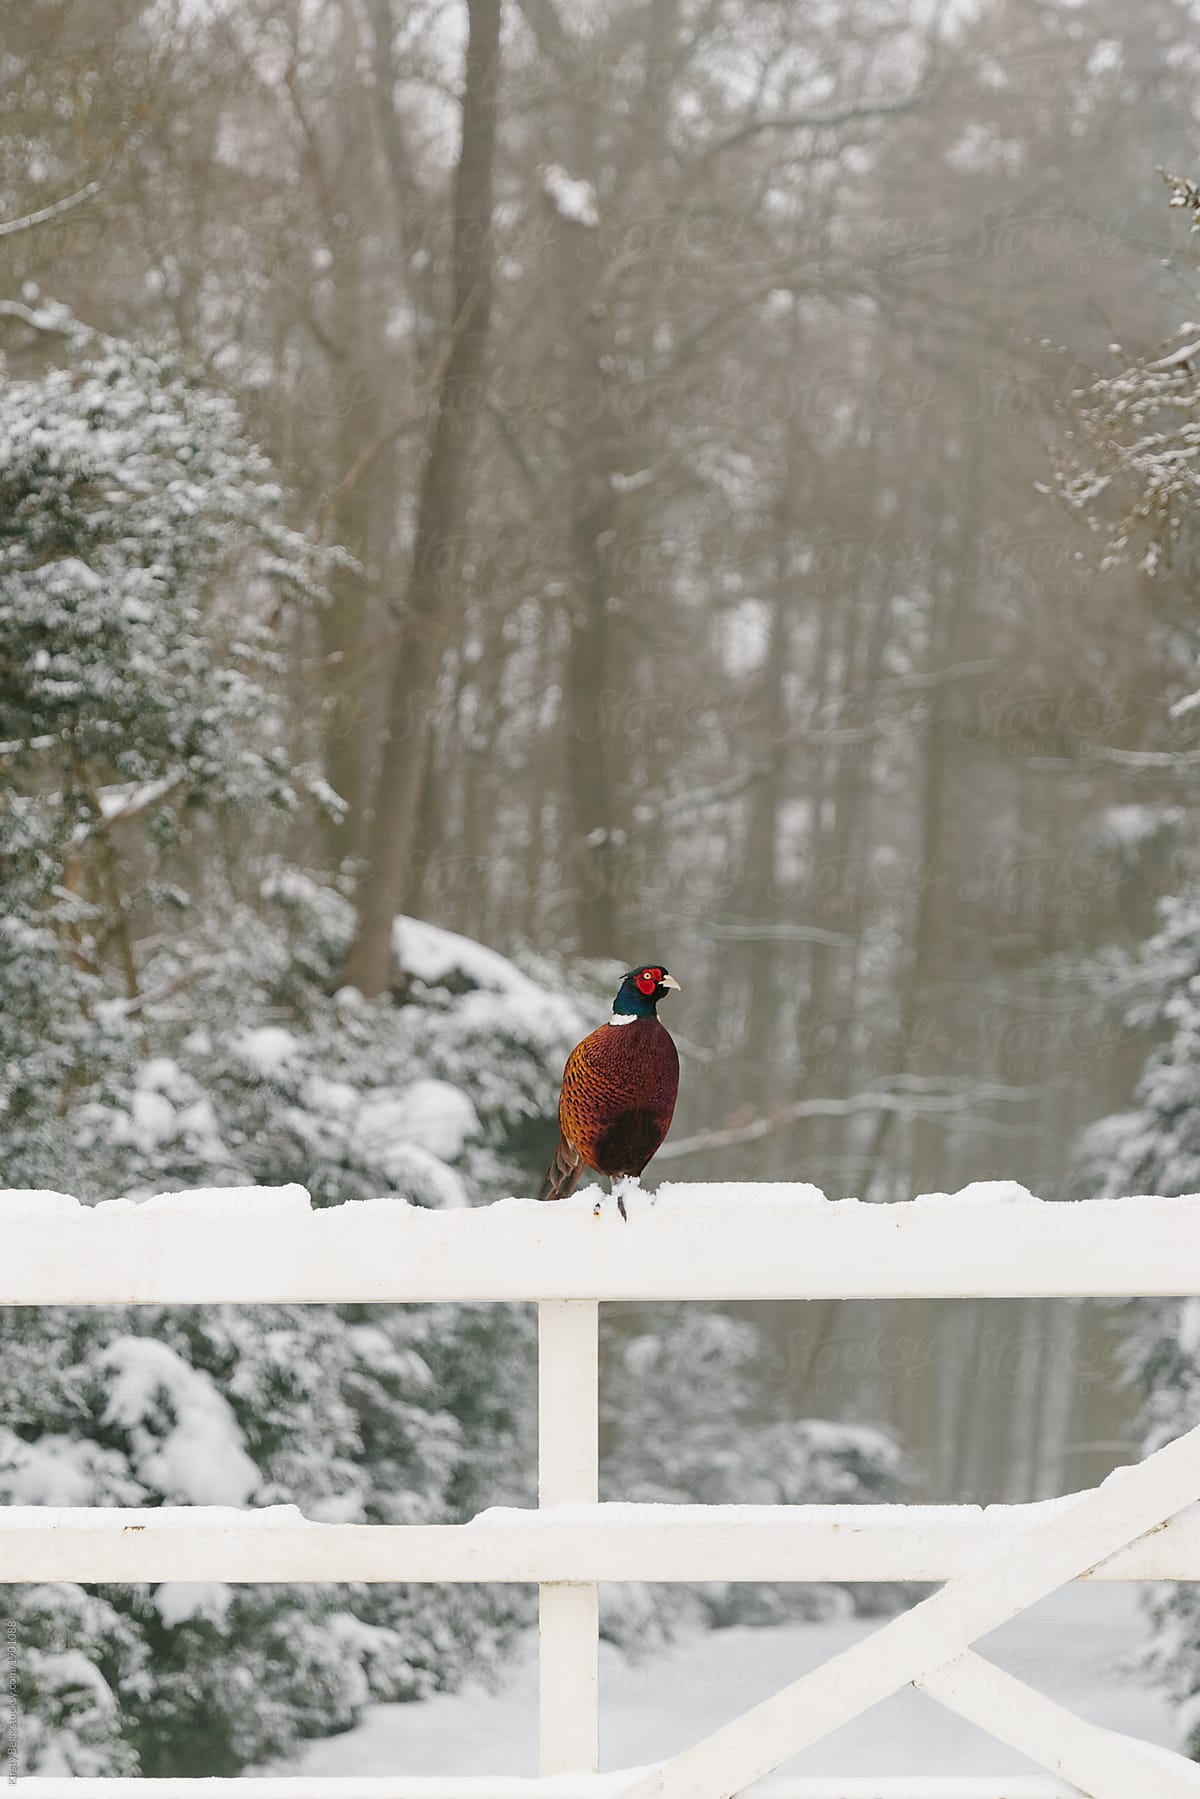 Pheasant perched on fence in woodland snow